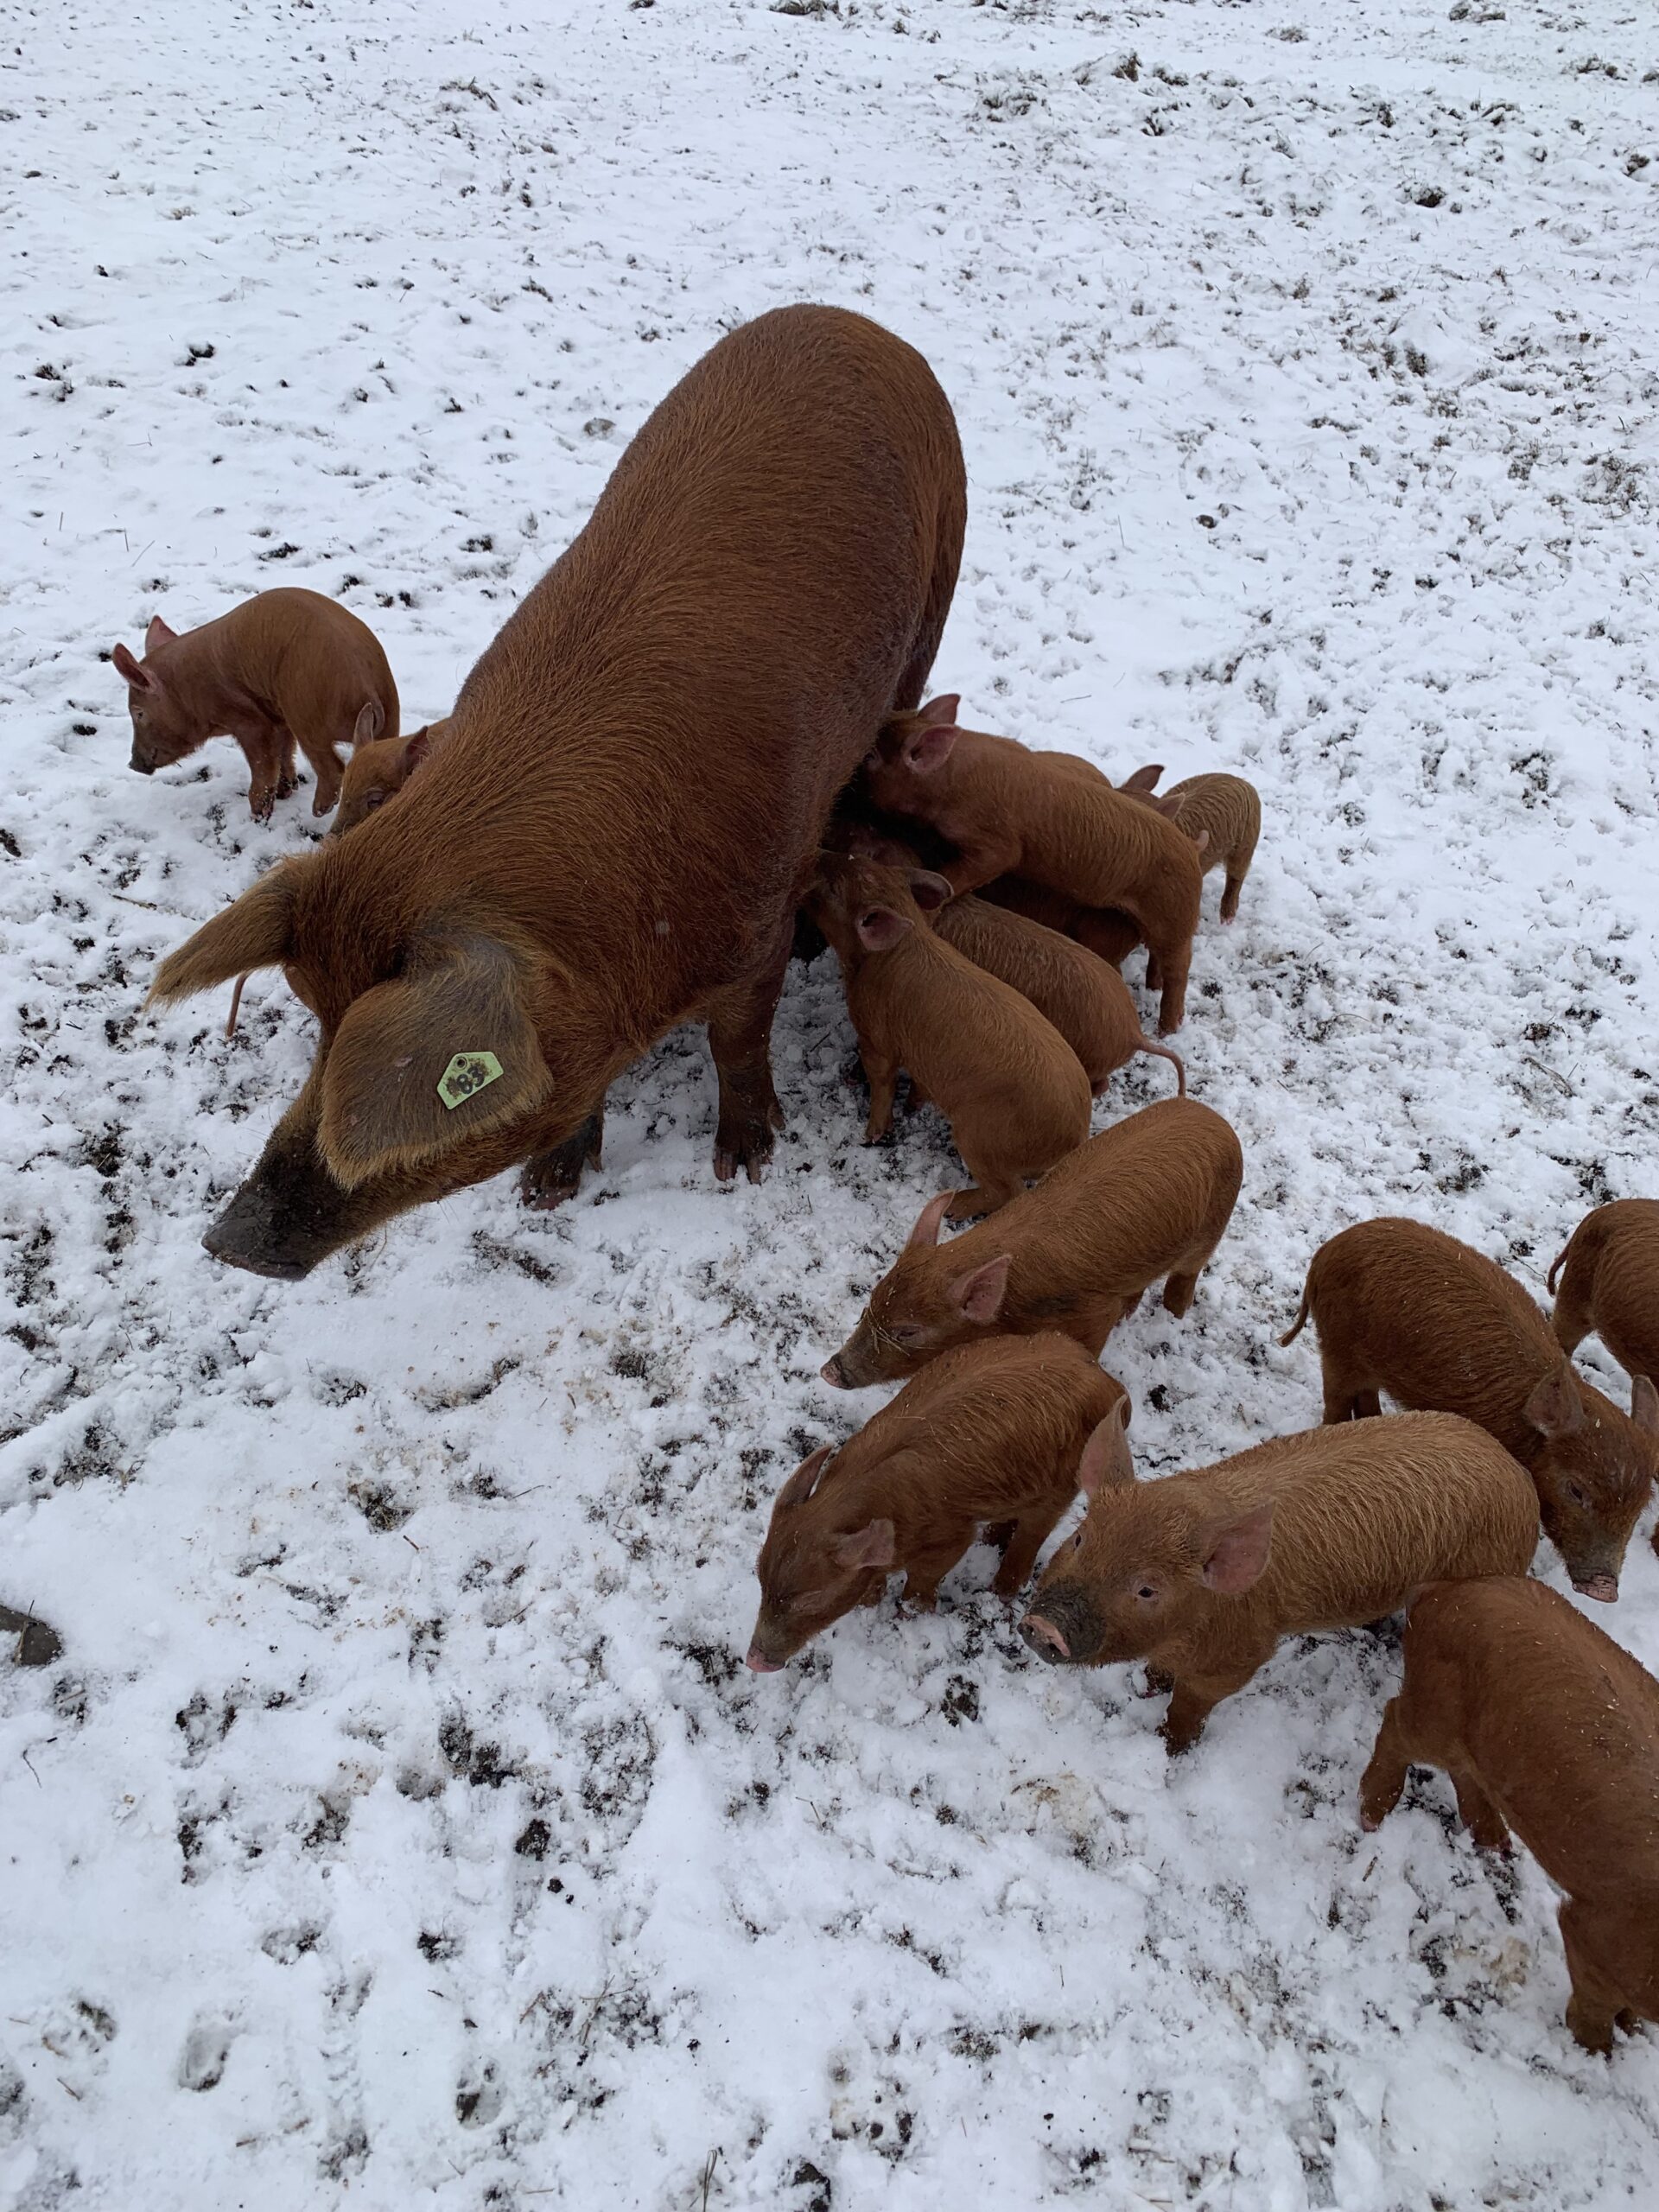 Pig and piglets in the snow